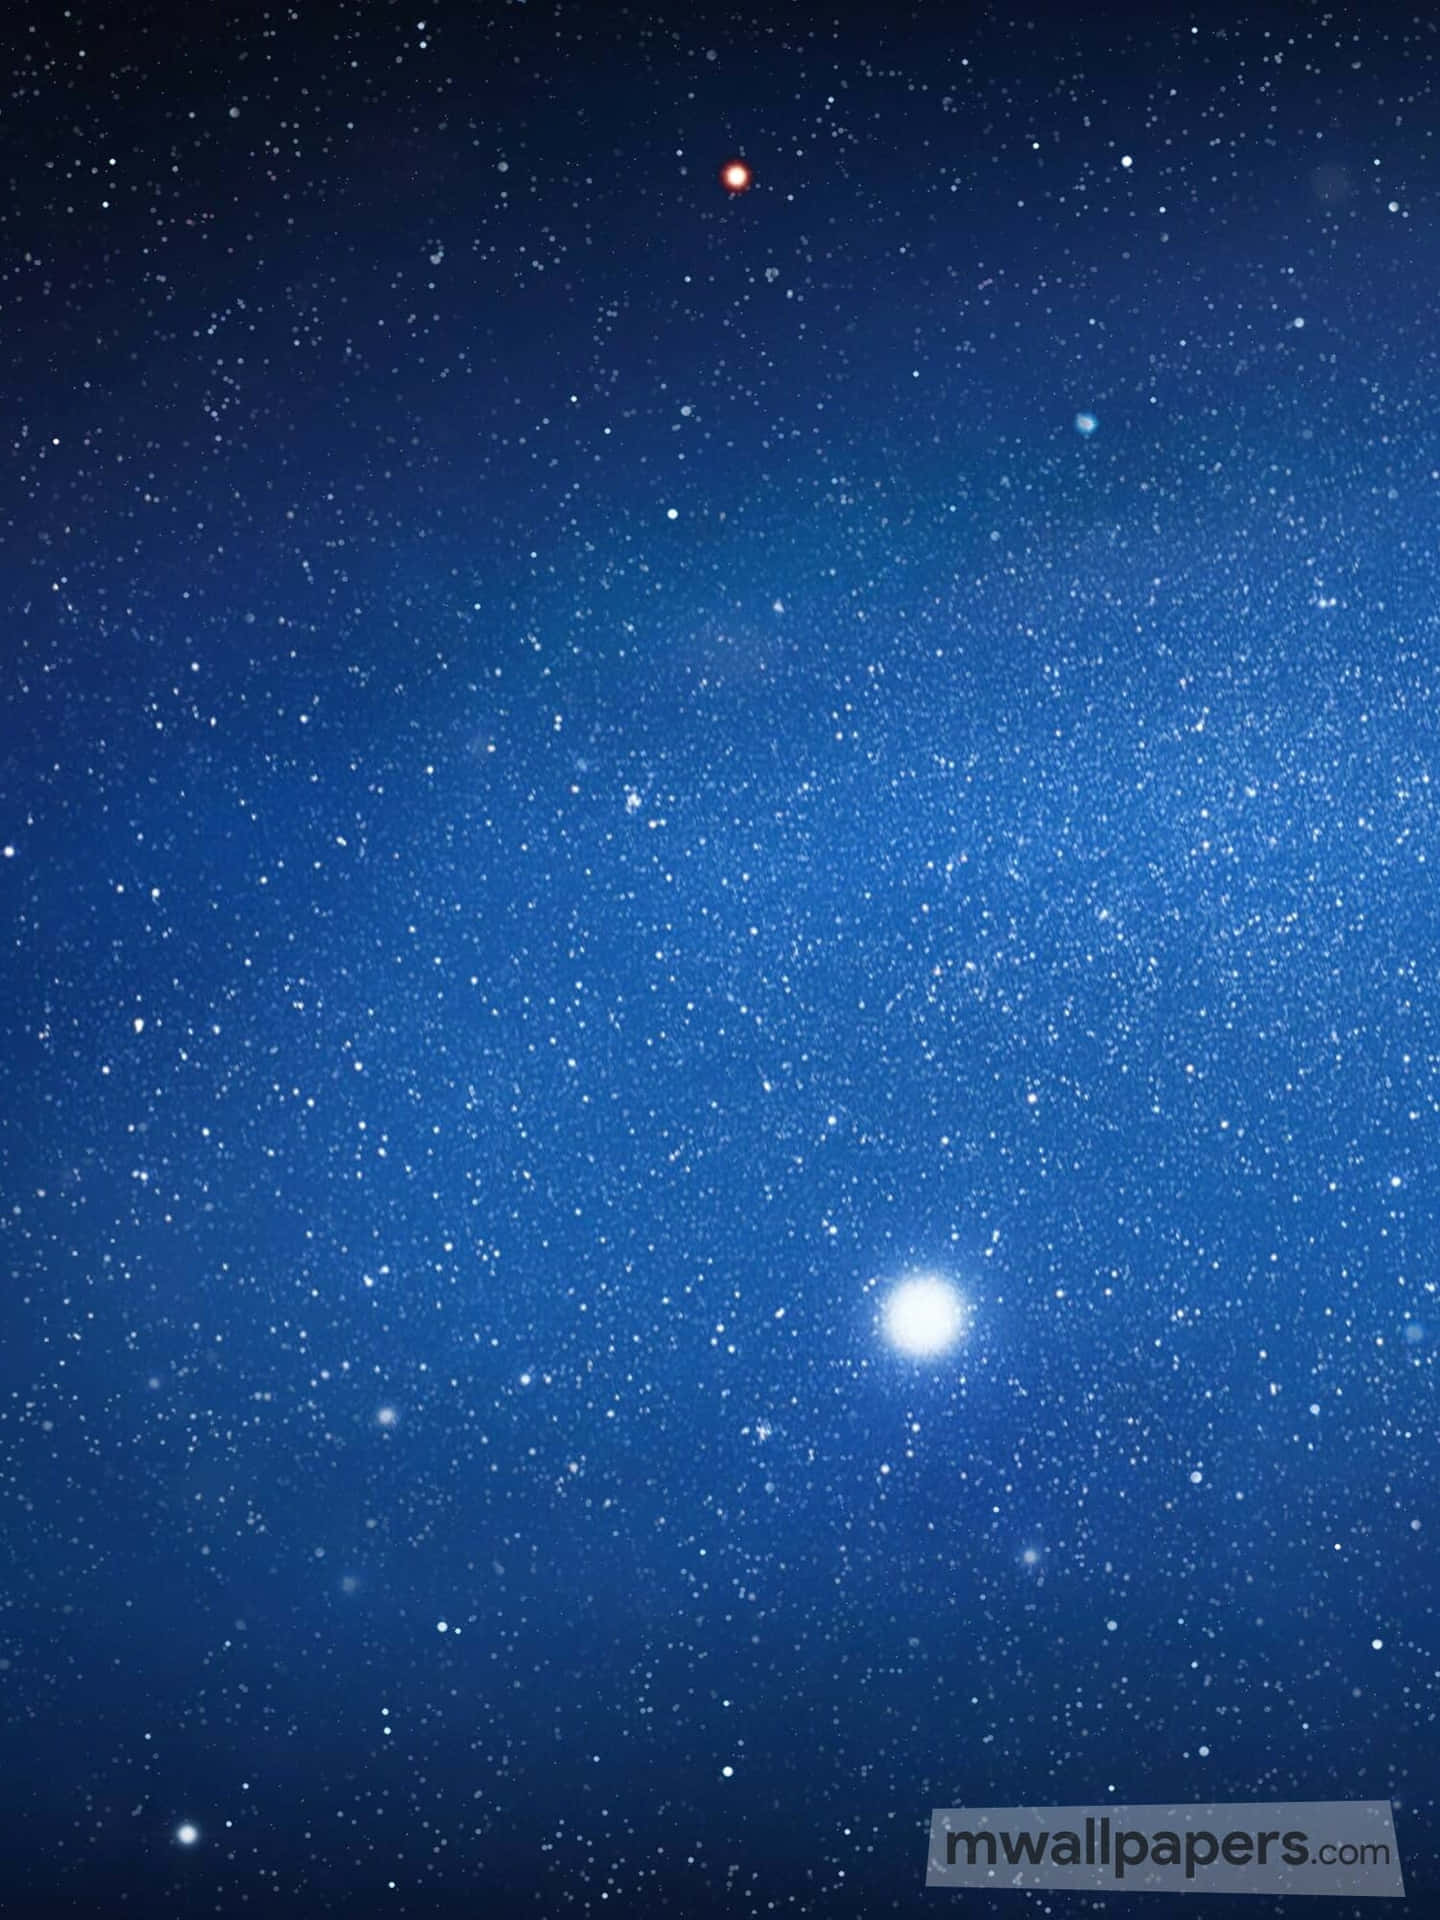 View of a Star-Filled Sky Wallpaper